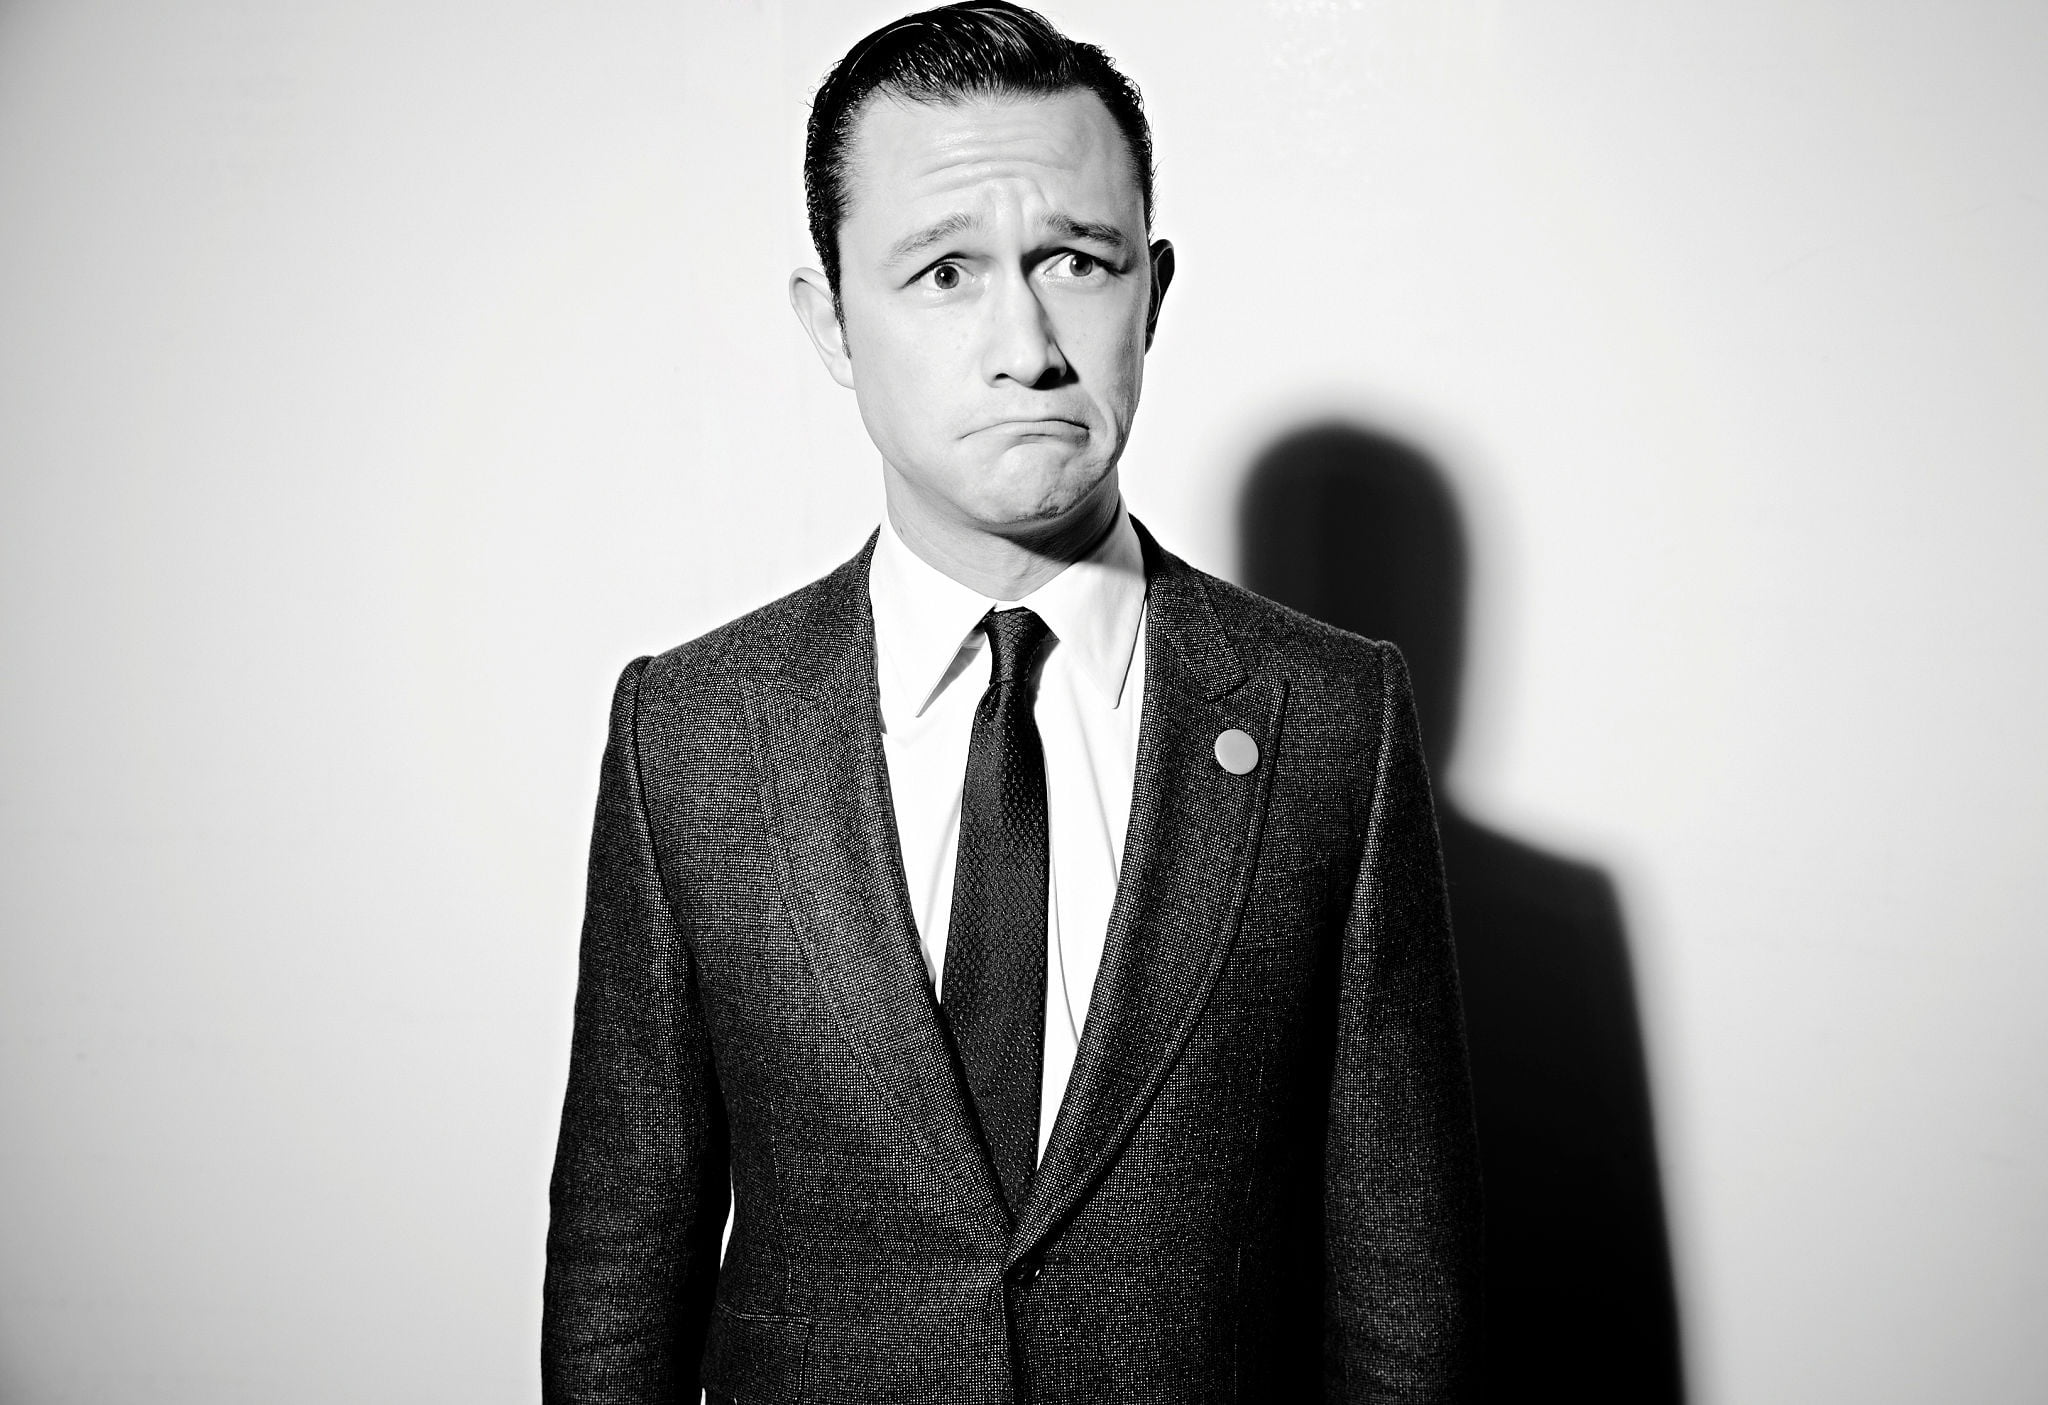 background, shadow, costume, tie, actor, black and white, jacket